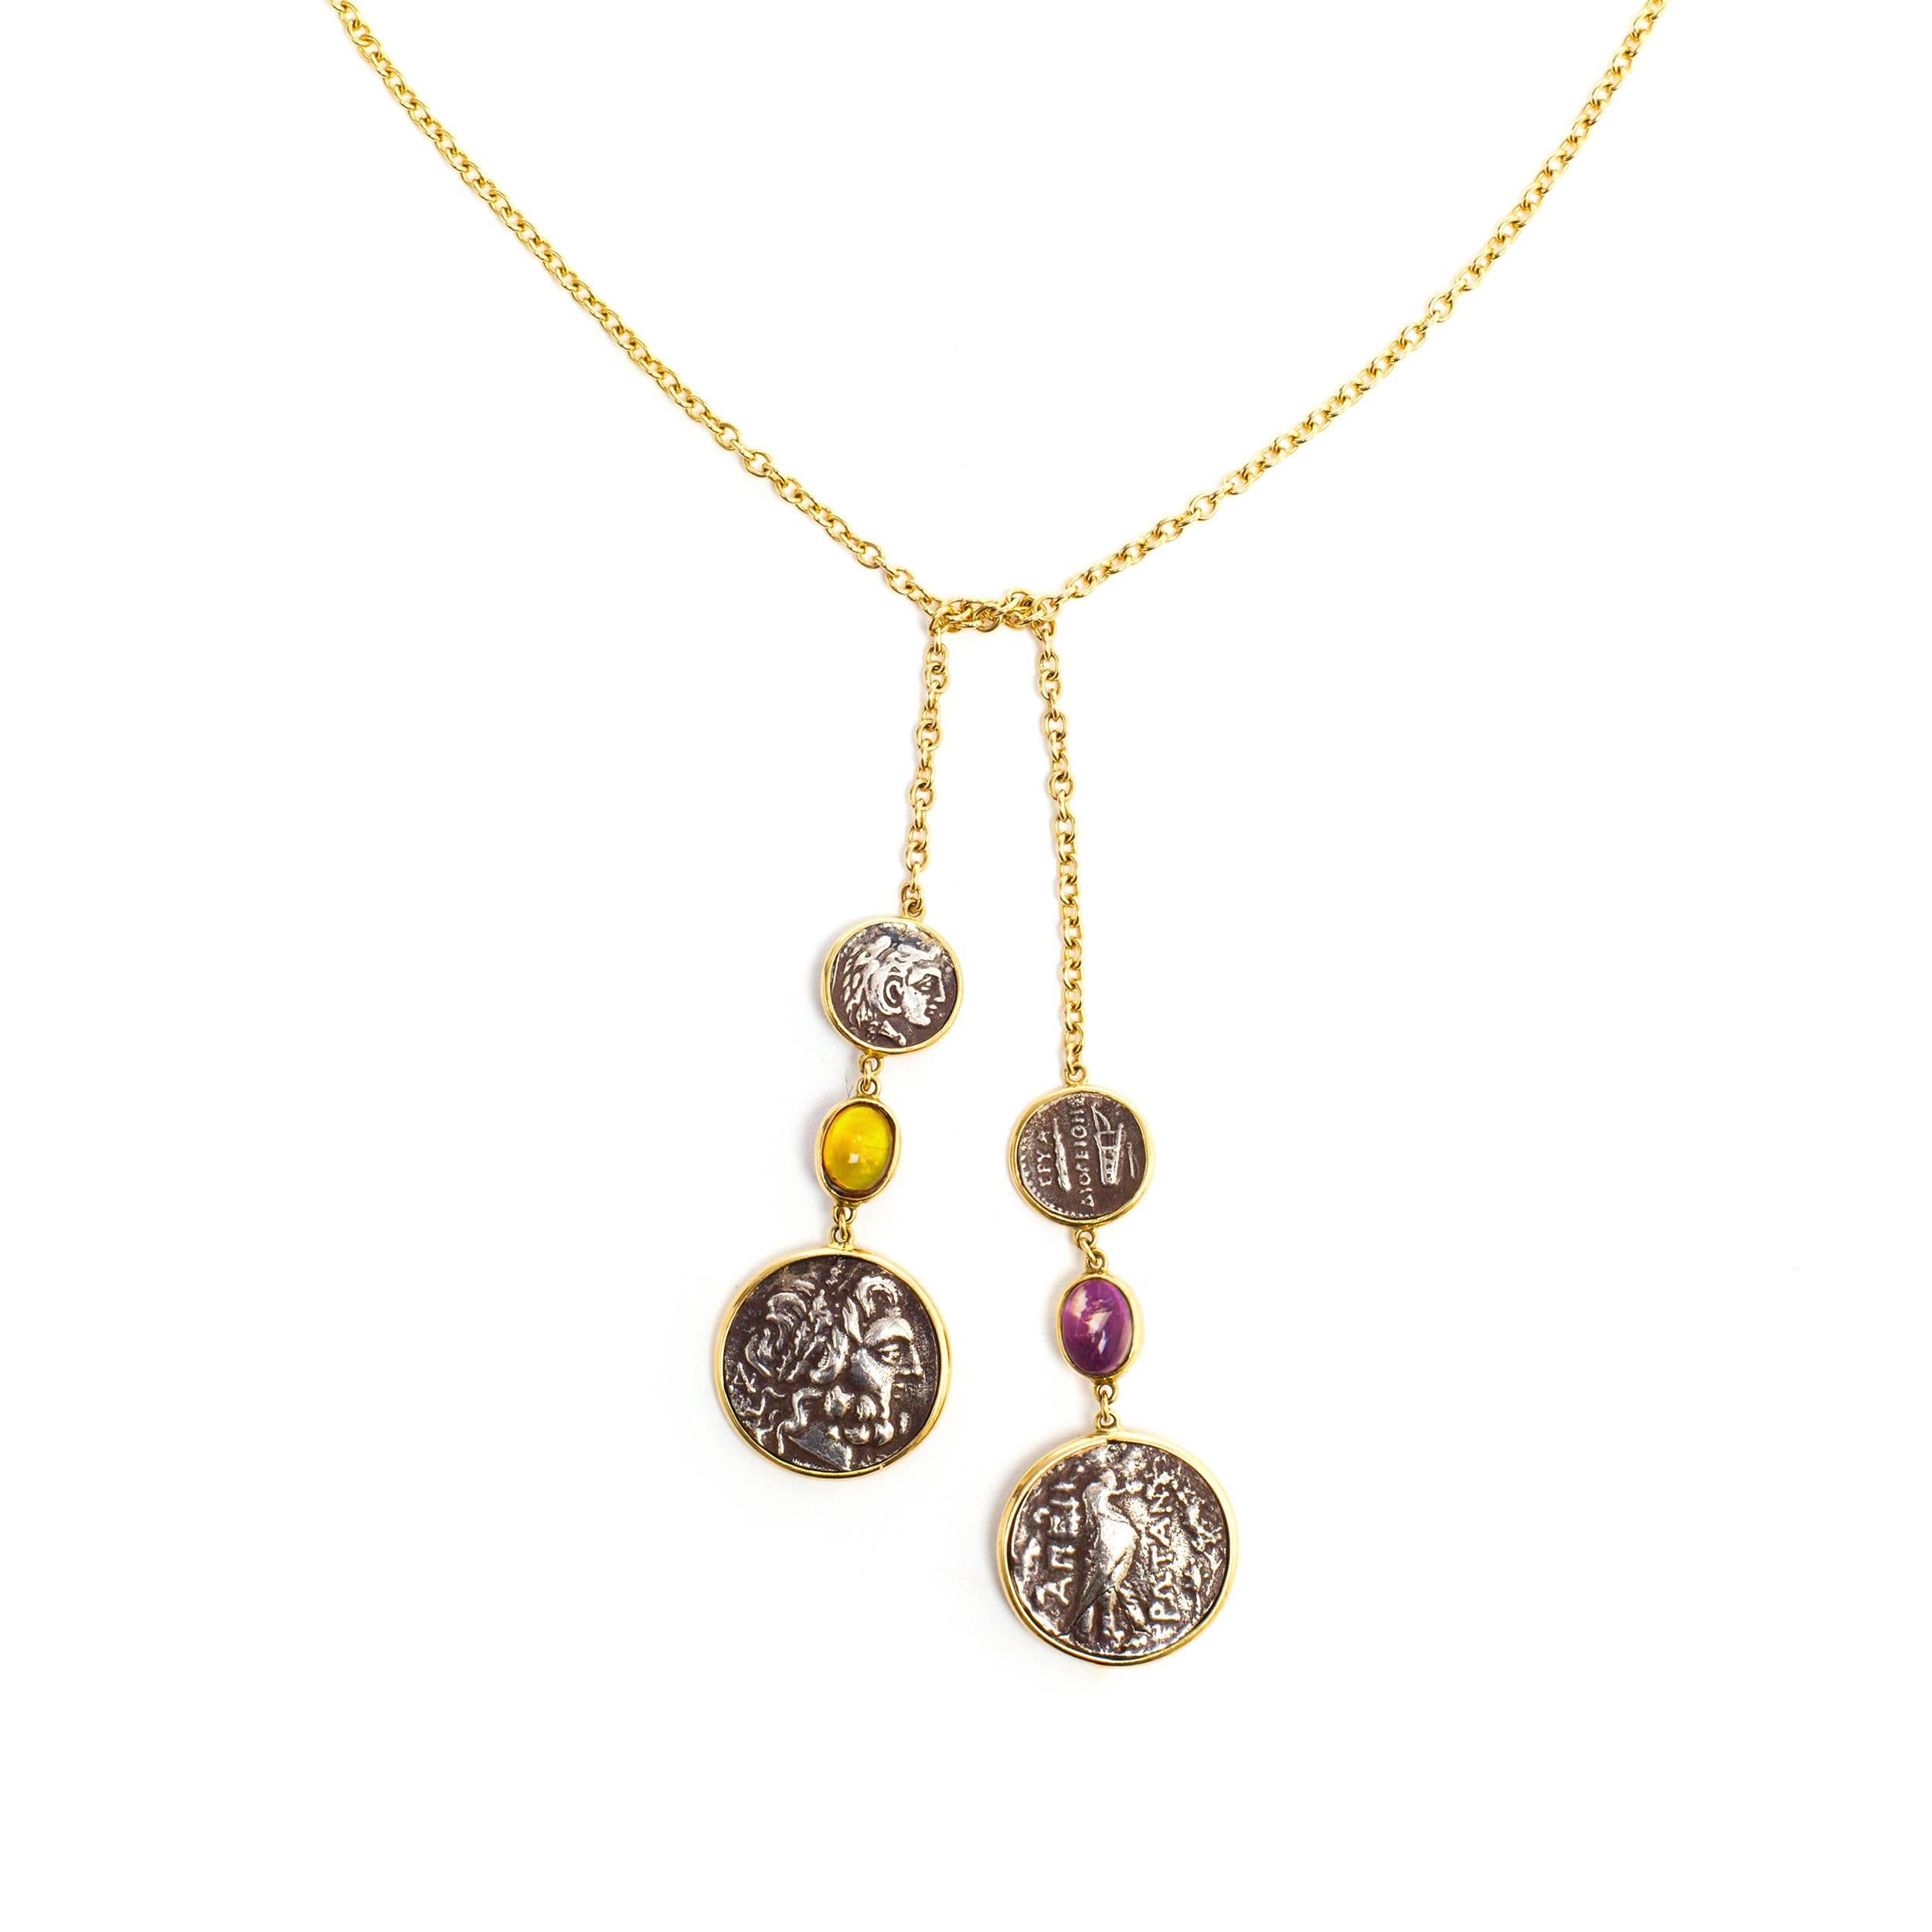 This DUBINI coin necklace from the 'Empires' collection features replica silver coins set with citrine and amethyst cabochons in 18K yellow gold.

Length of necklace: 87 cm
Chain : 76